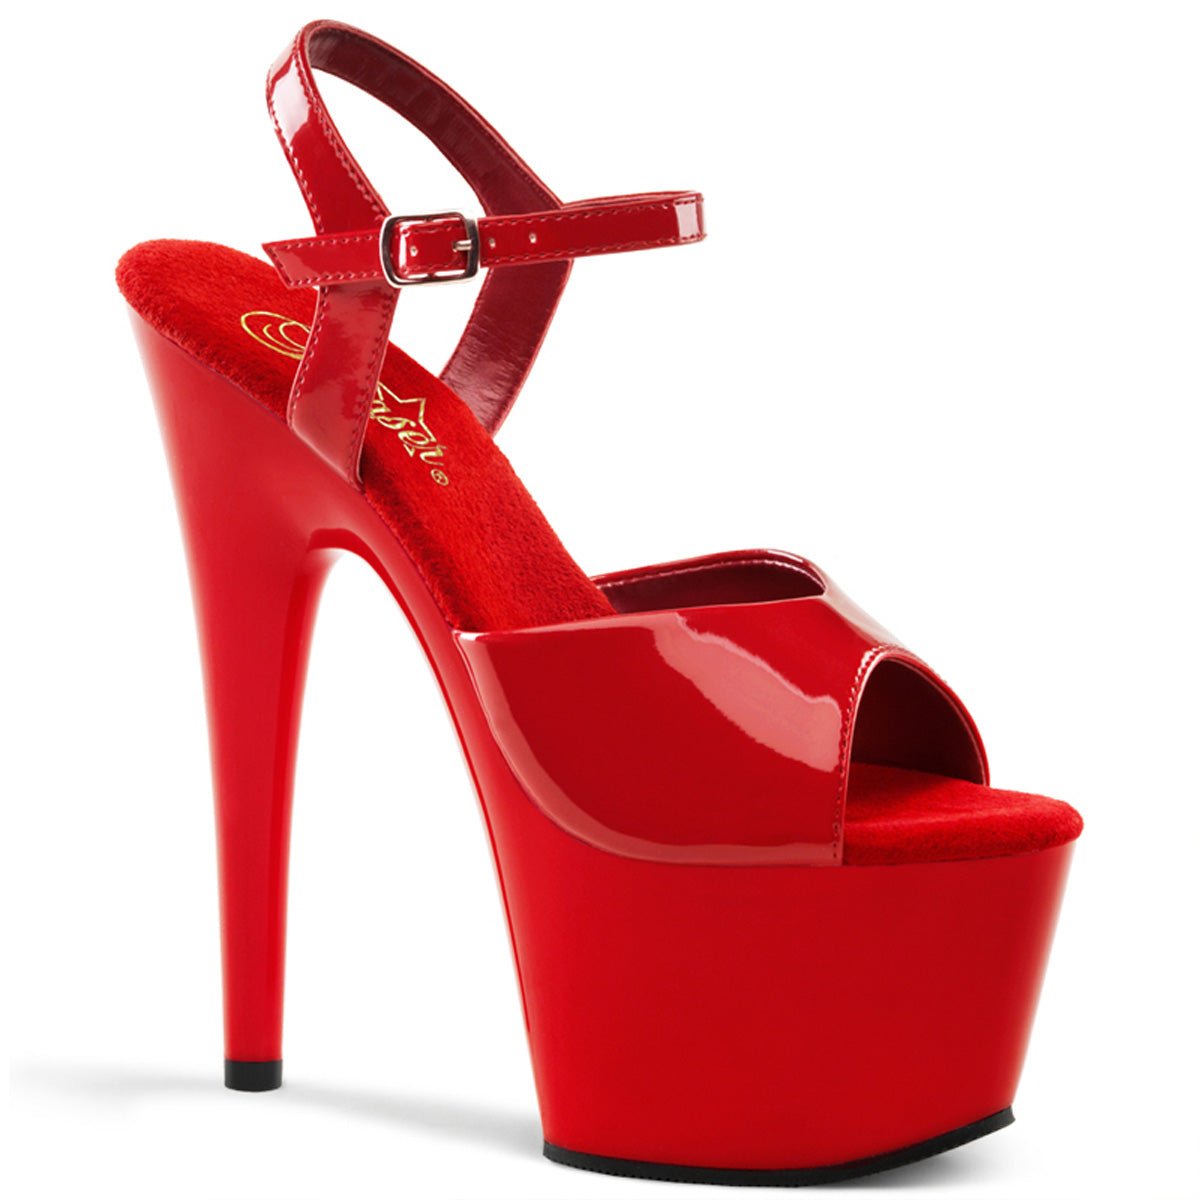 Clearance Pleaser Adore 709 Red Patent Size 7UK/10USA